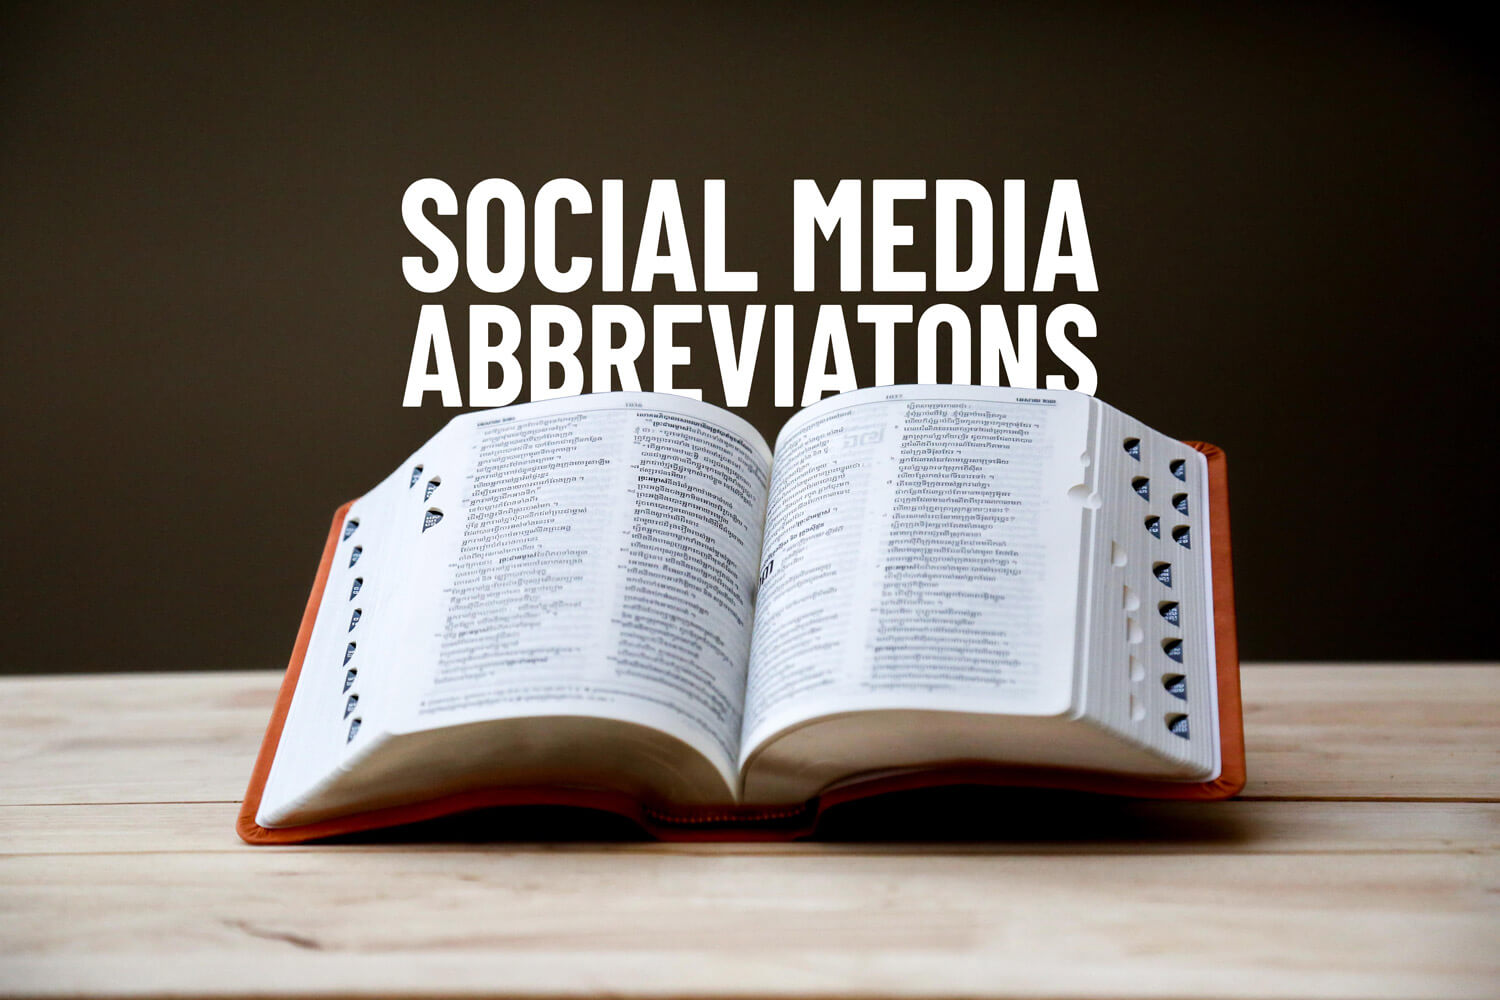 100+ Social Media Acronyms and Abbreviations Every Marketer Needs to Know